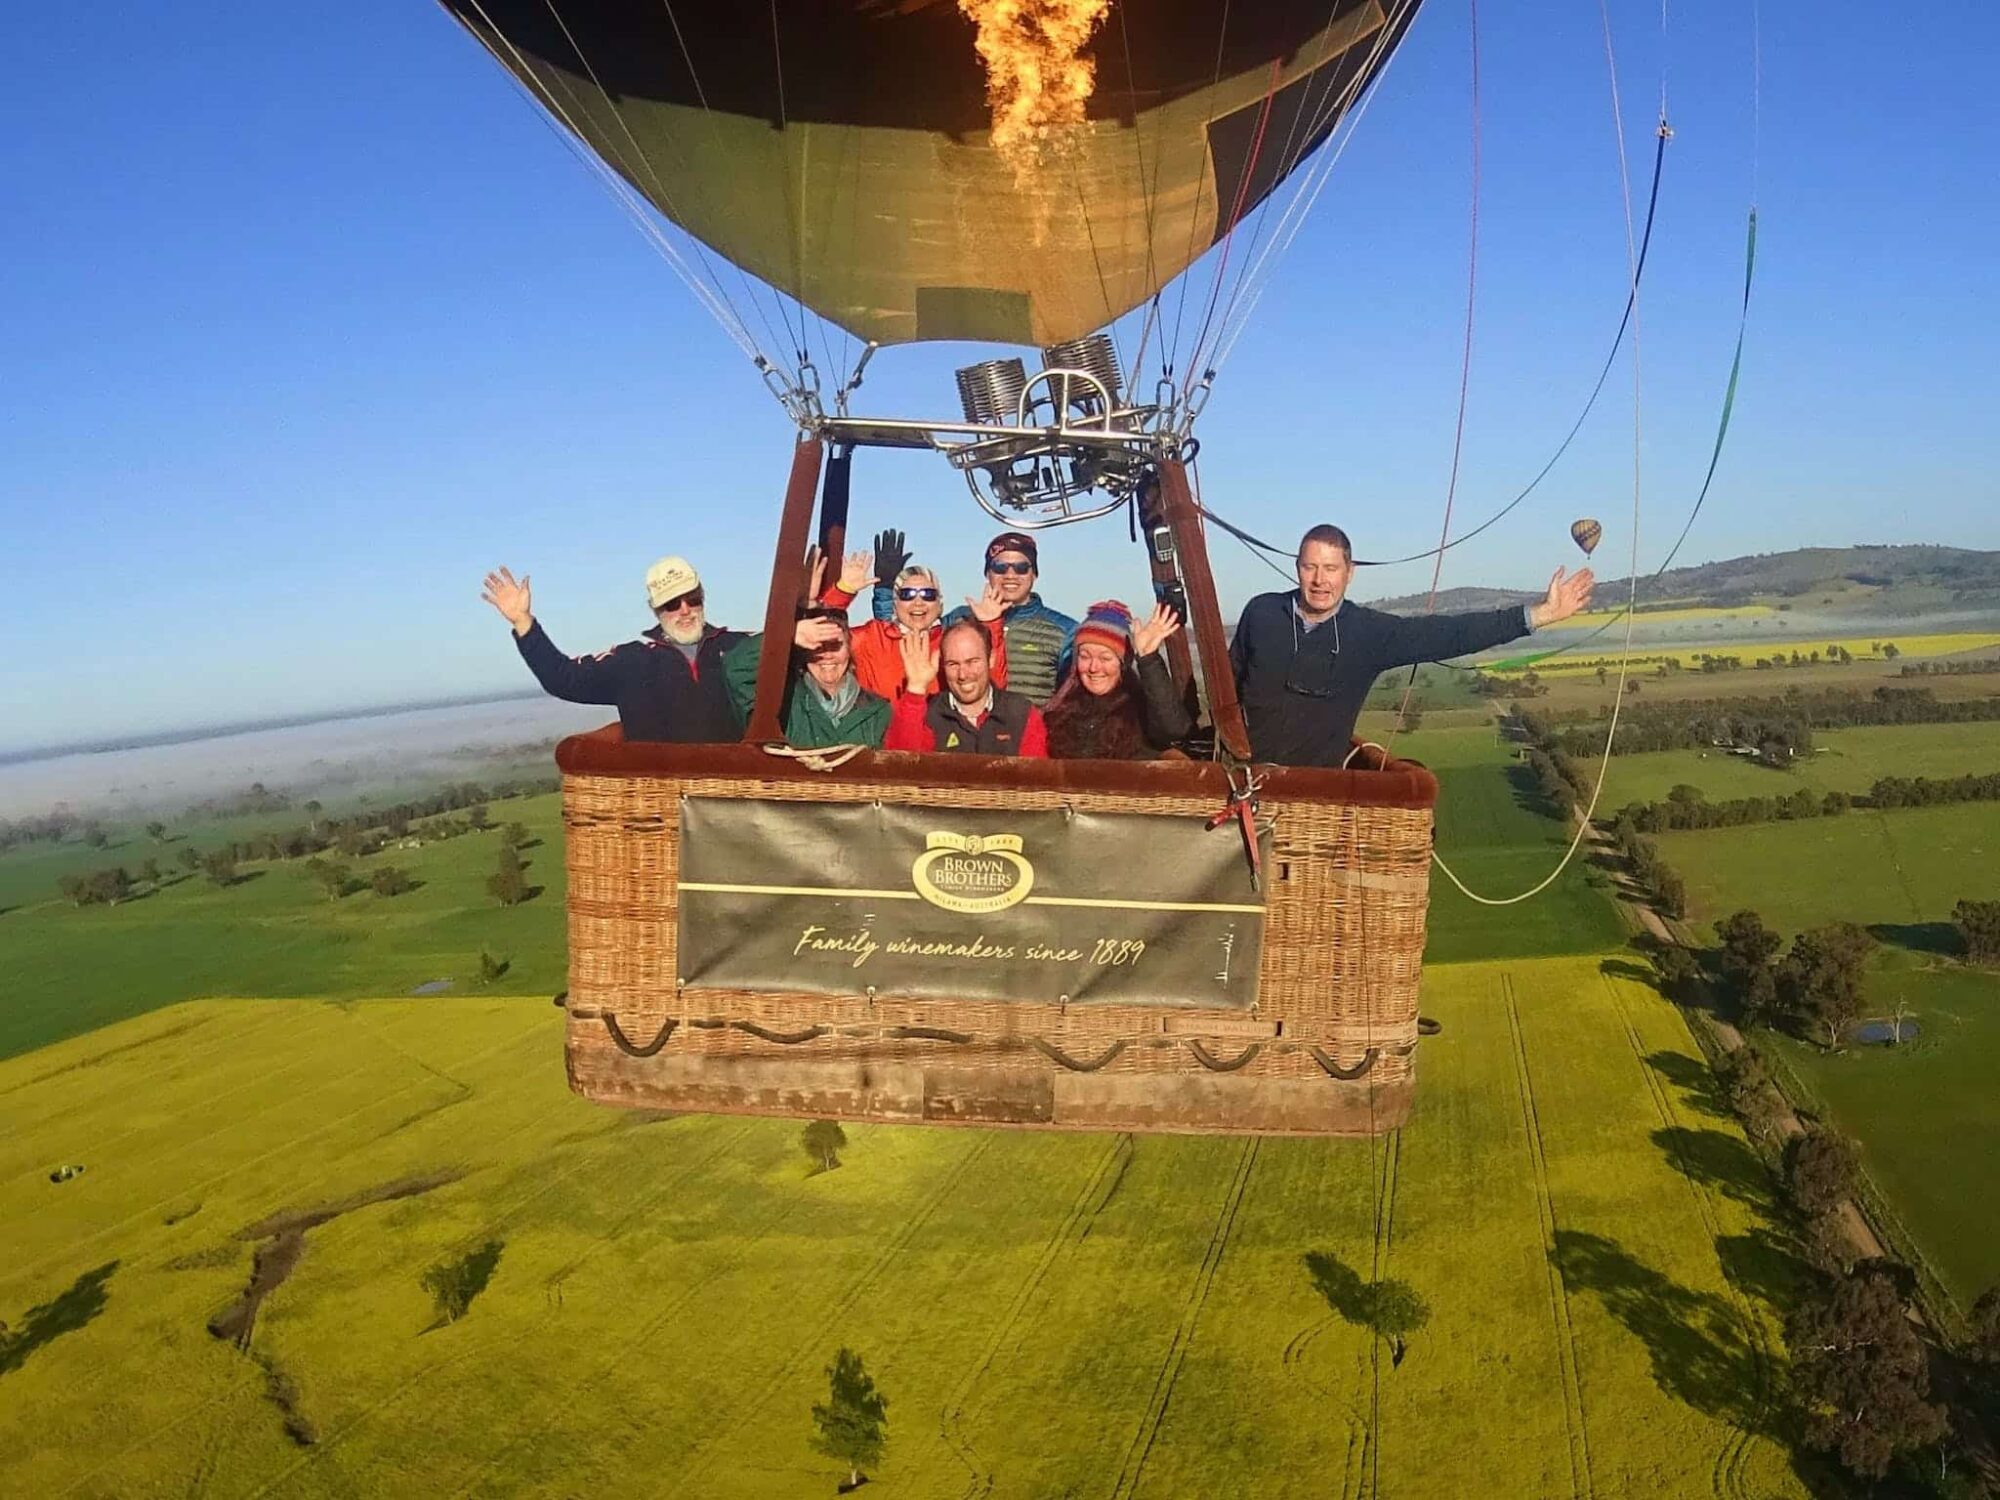 Balloon basket with guests aloft over the canola fields